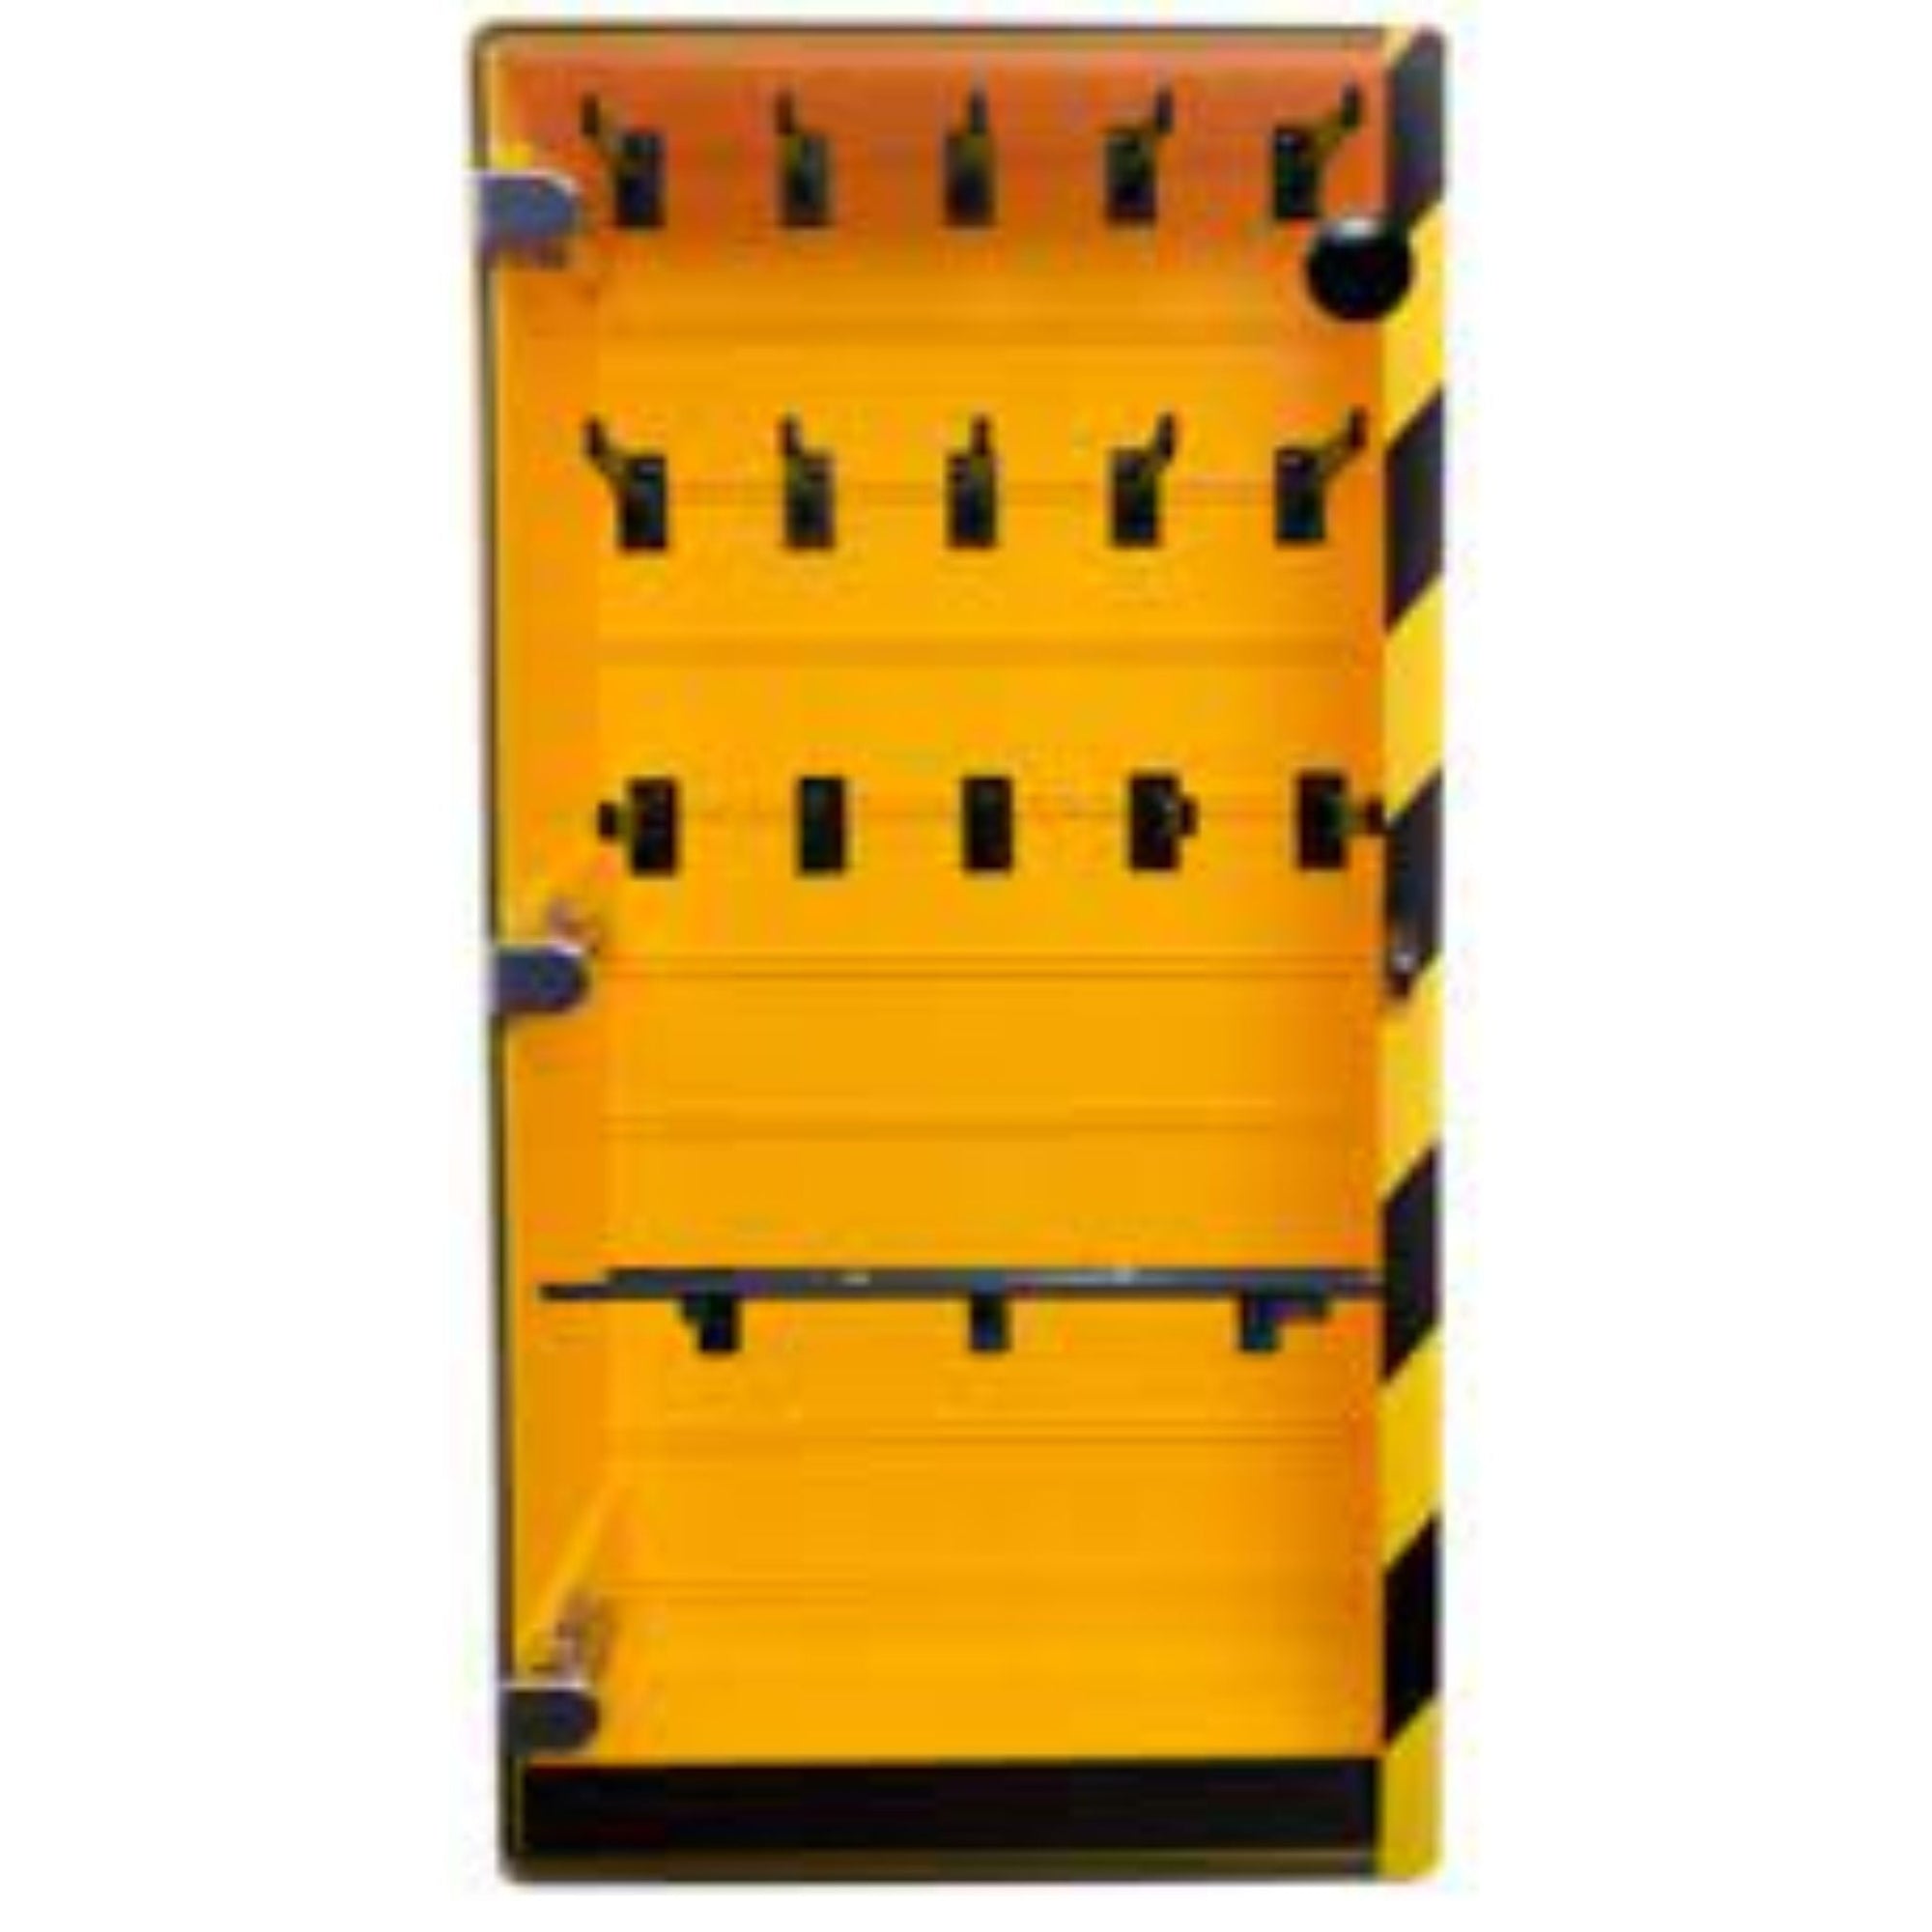 Abus 17055 Lockout Cabinets - 15-Inch by 30-Inch LOTO Stations for Lockout Tagout Devices - The Lock Source